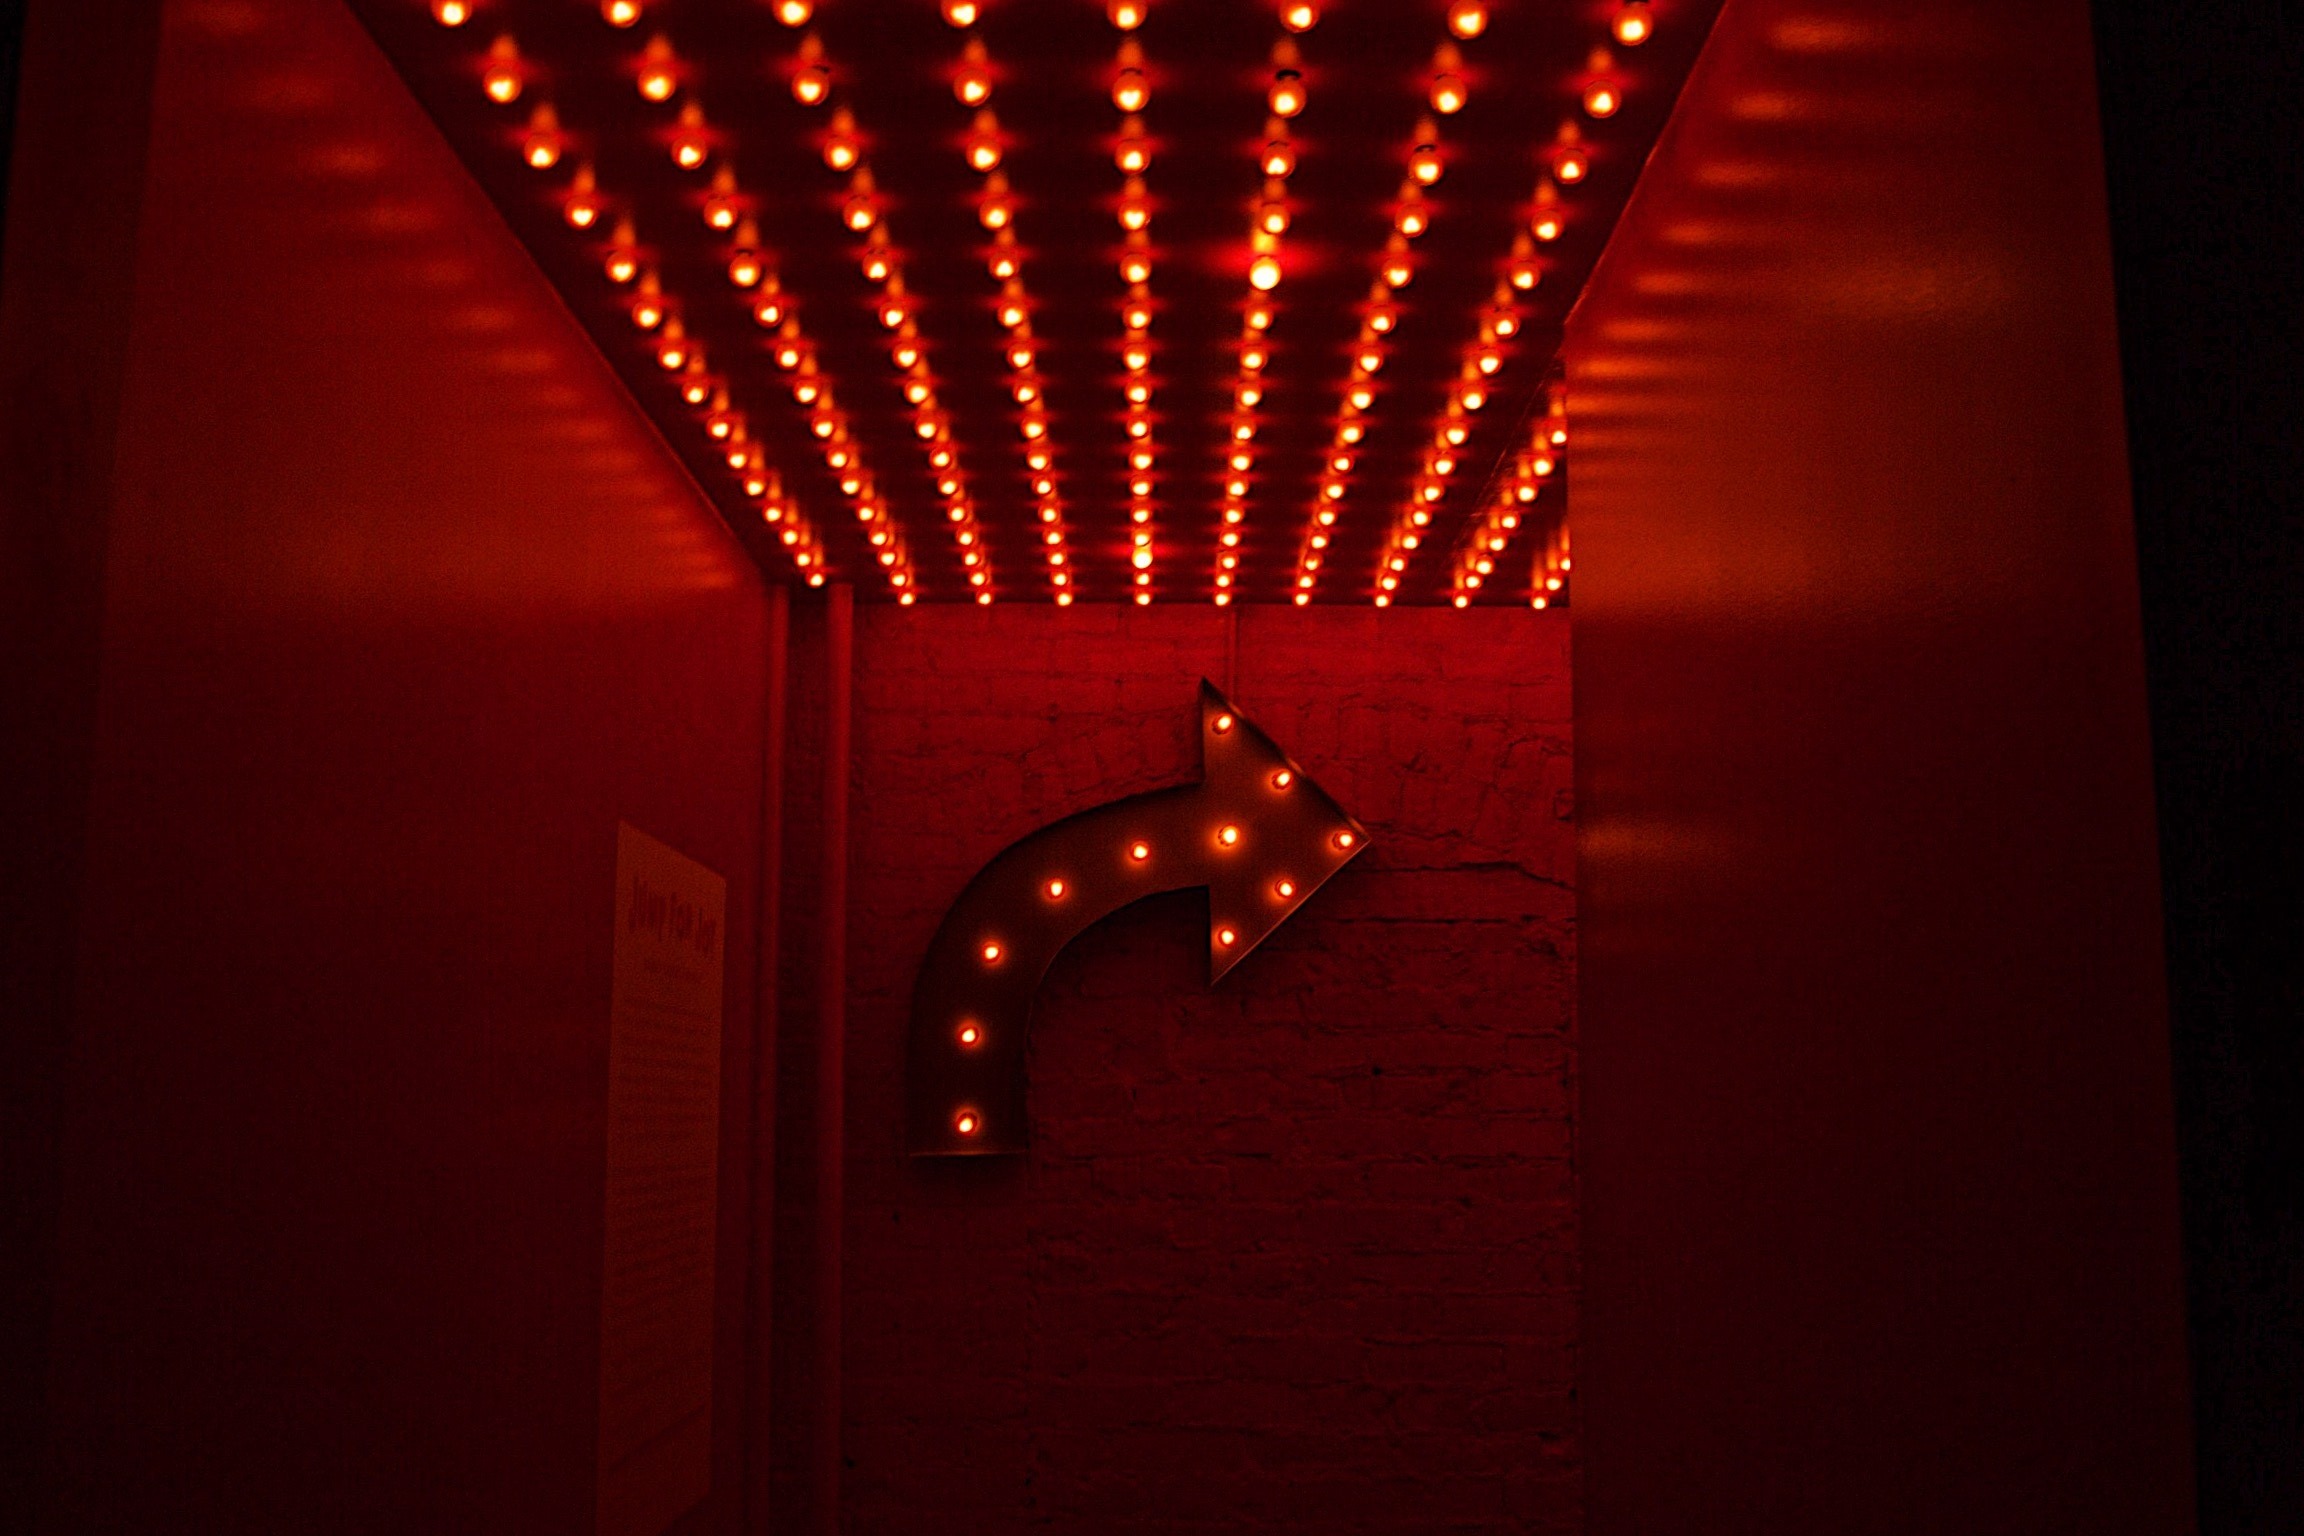 red photo. A series of light bulbs for, the shape of an arrow pointing right. A series of red lightbulbs are placed on the ceiling as well.